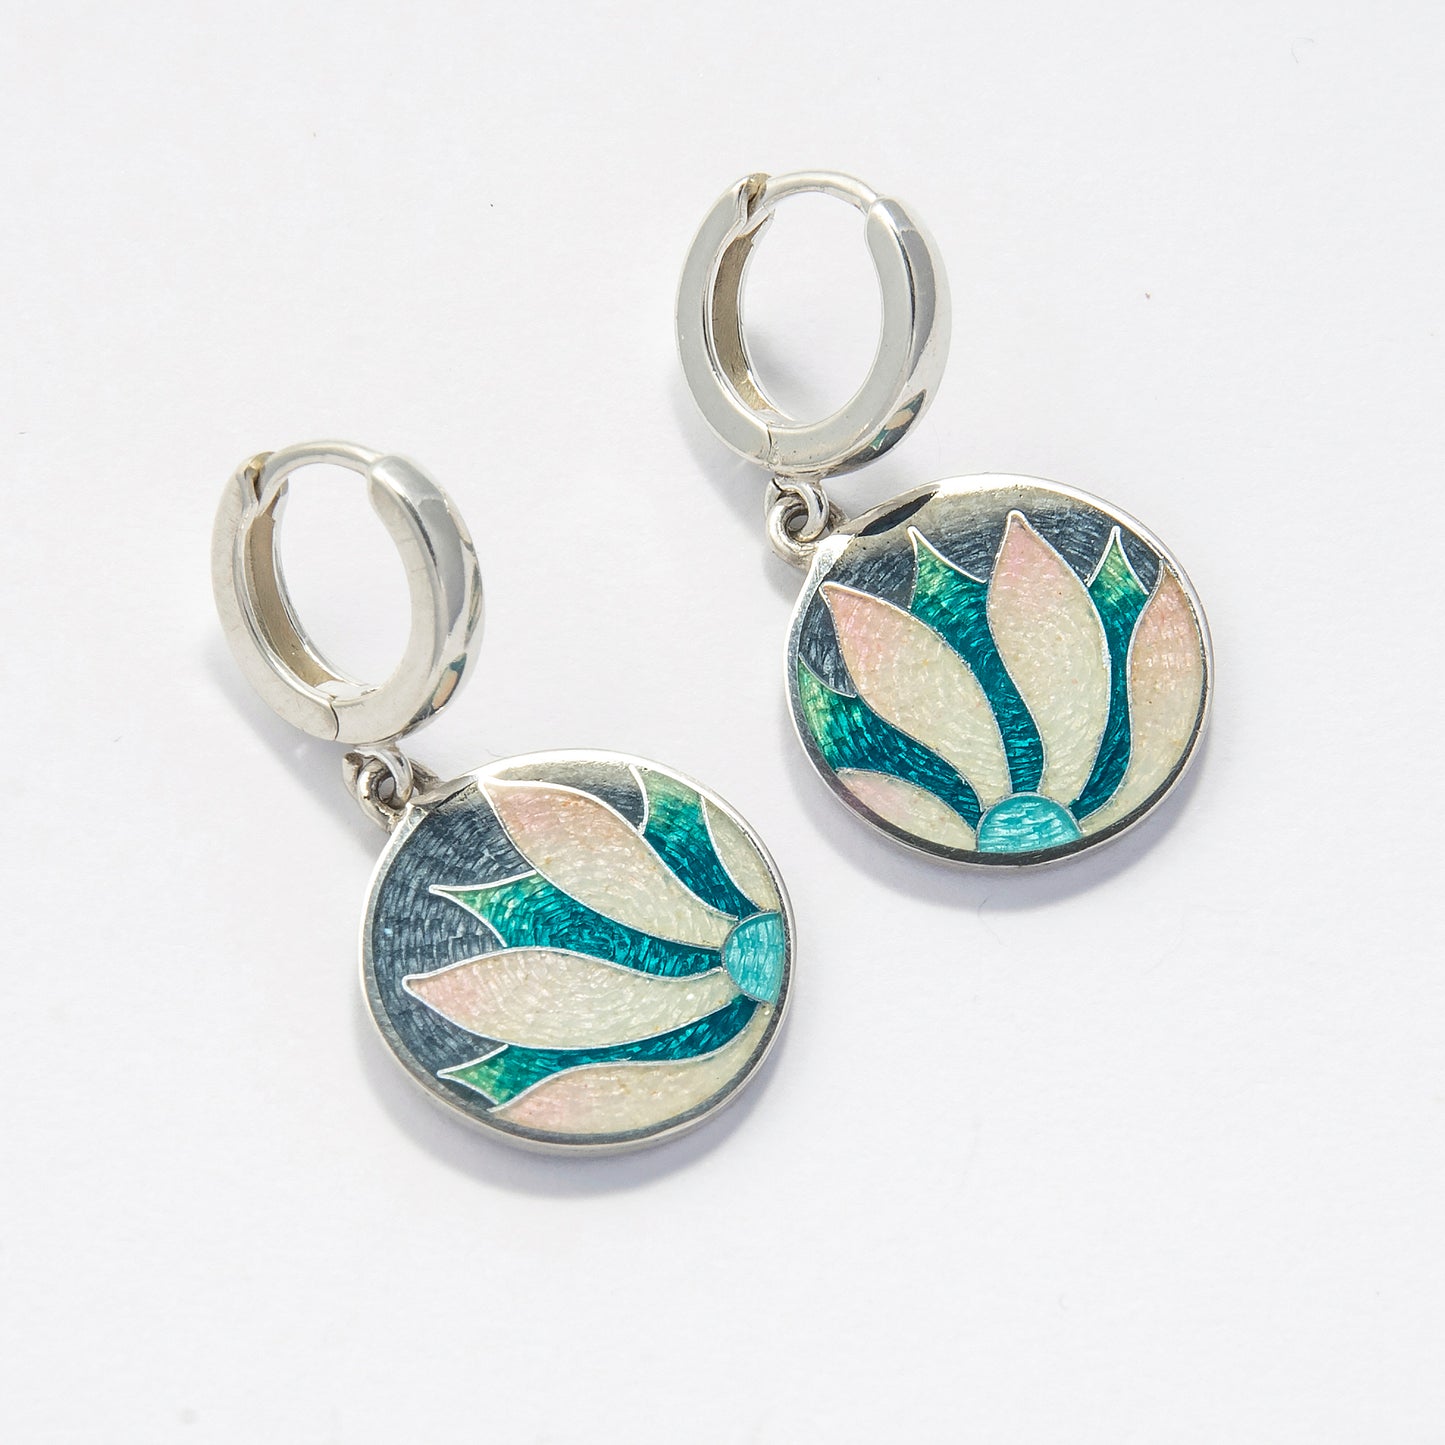 Cloisonné Enamel, Sterling Silver, Round Earrings "Snowdrops"